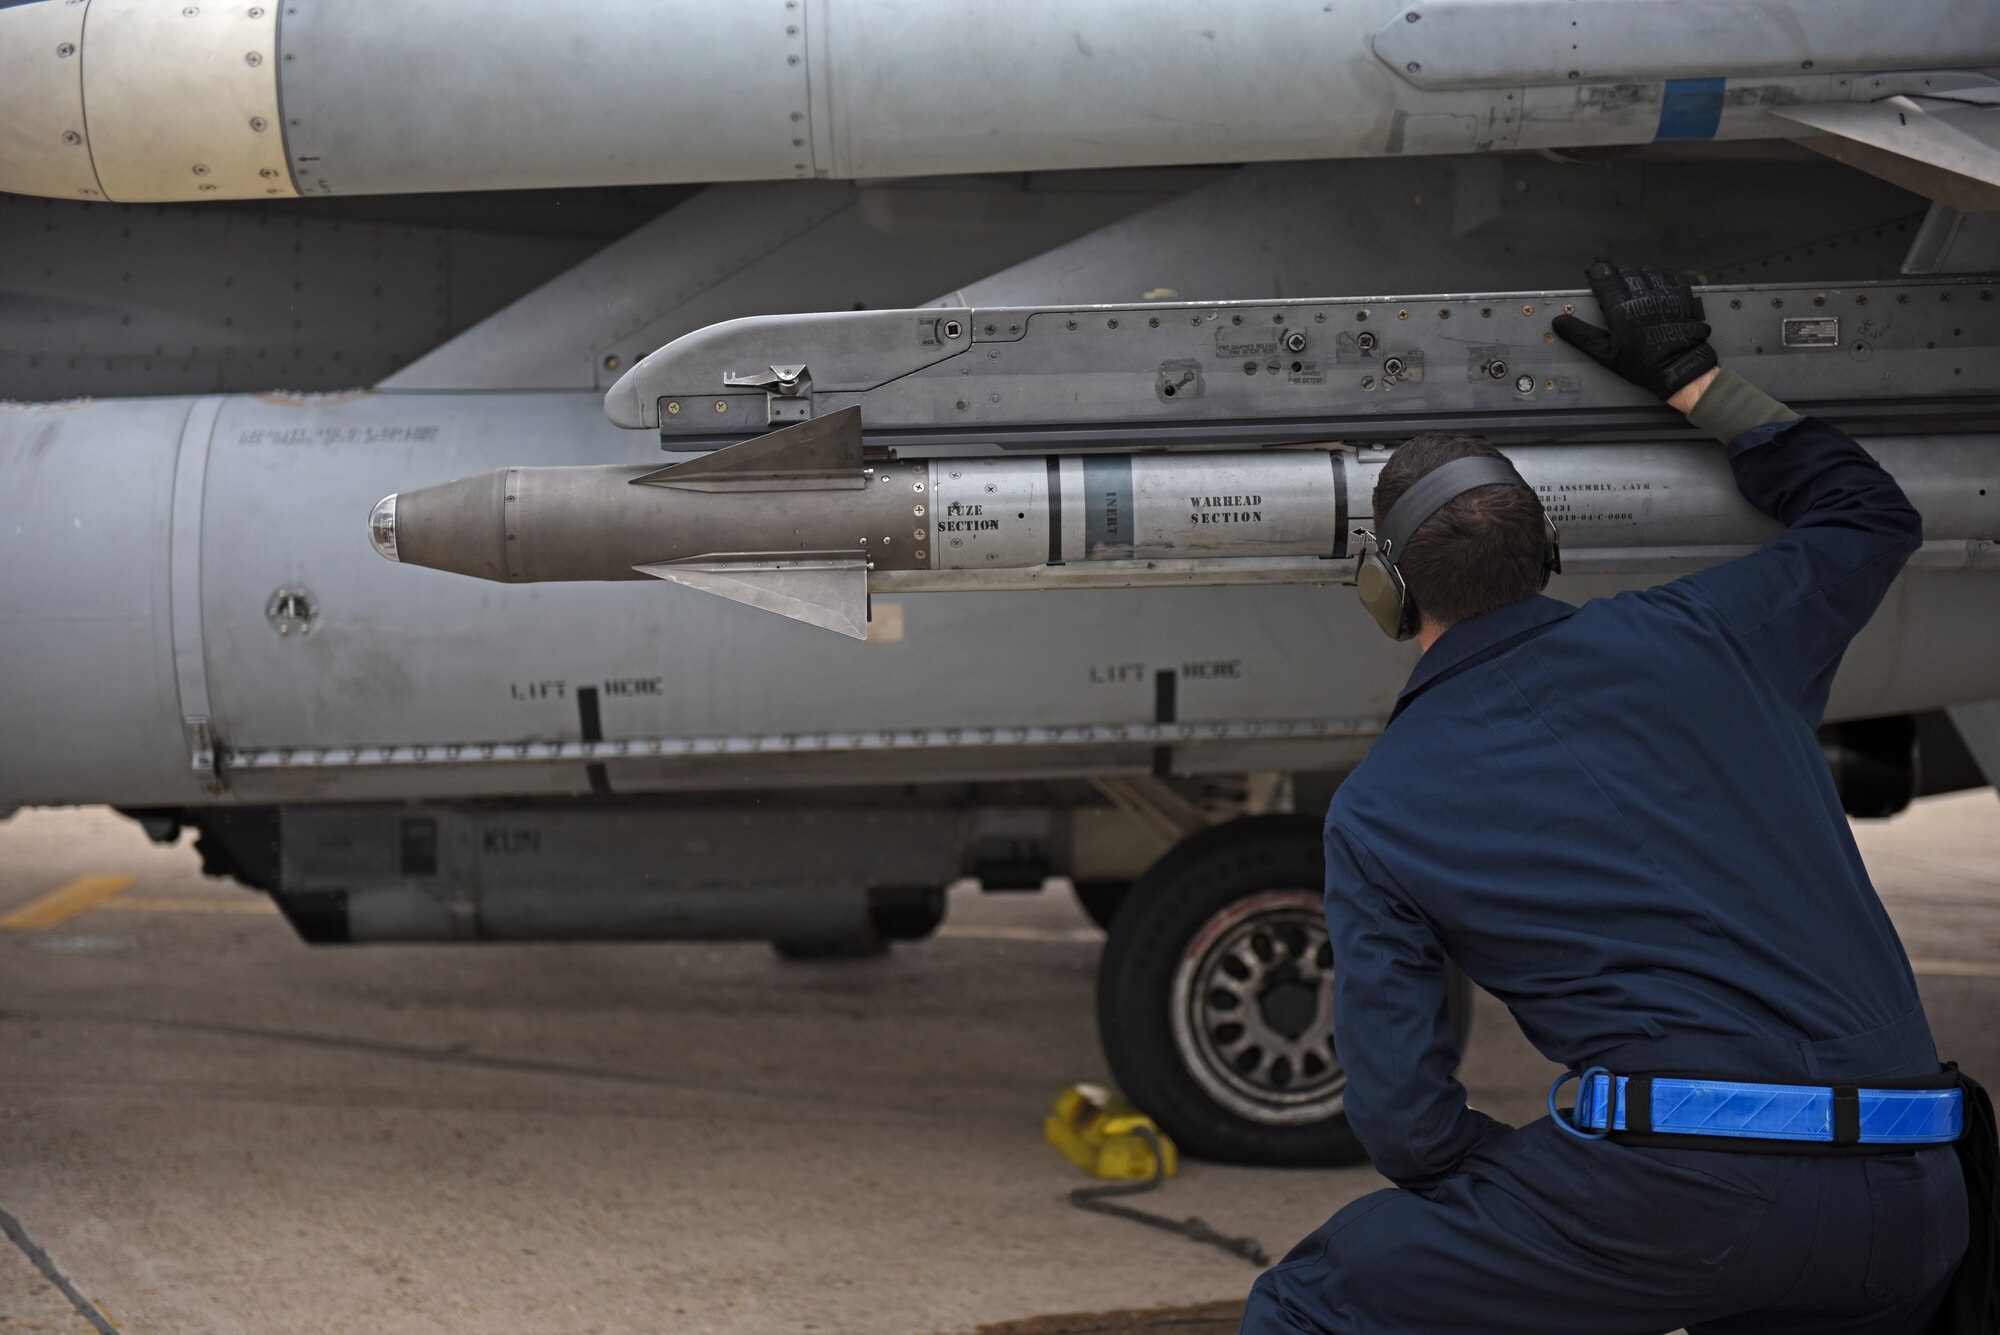 A U.S. Air Force maintainer assigned to the 35th Aircraft Maintenance Unit conducts a pre-flight inspection at Kunsan Air Base, Republic of Korea, Nov. 19, 2019. The 8th Maintenance Group provides on- and off-equipment maintenance on F-16 Fighting Falcons. The group also provides munitions, aircraft maintenance and maintenance operations support. (U.S. Air Force photo by Staff Sgt. Mackenzie Mendez)